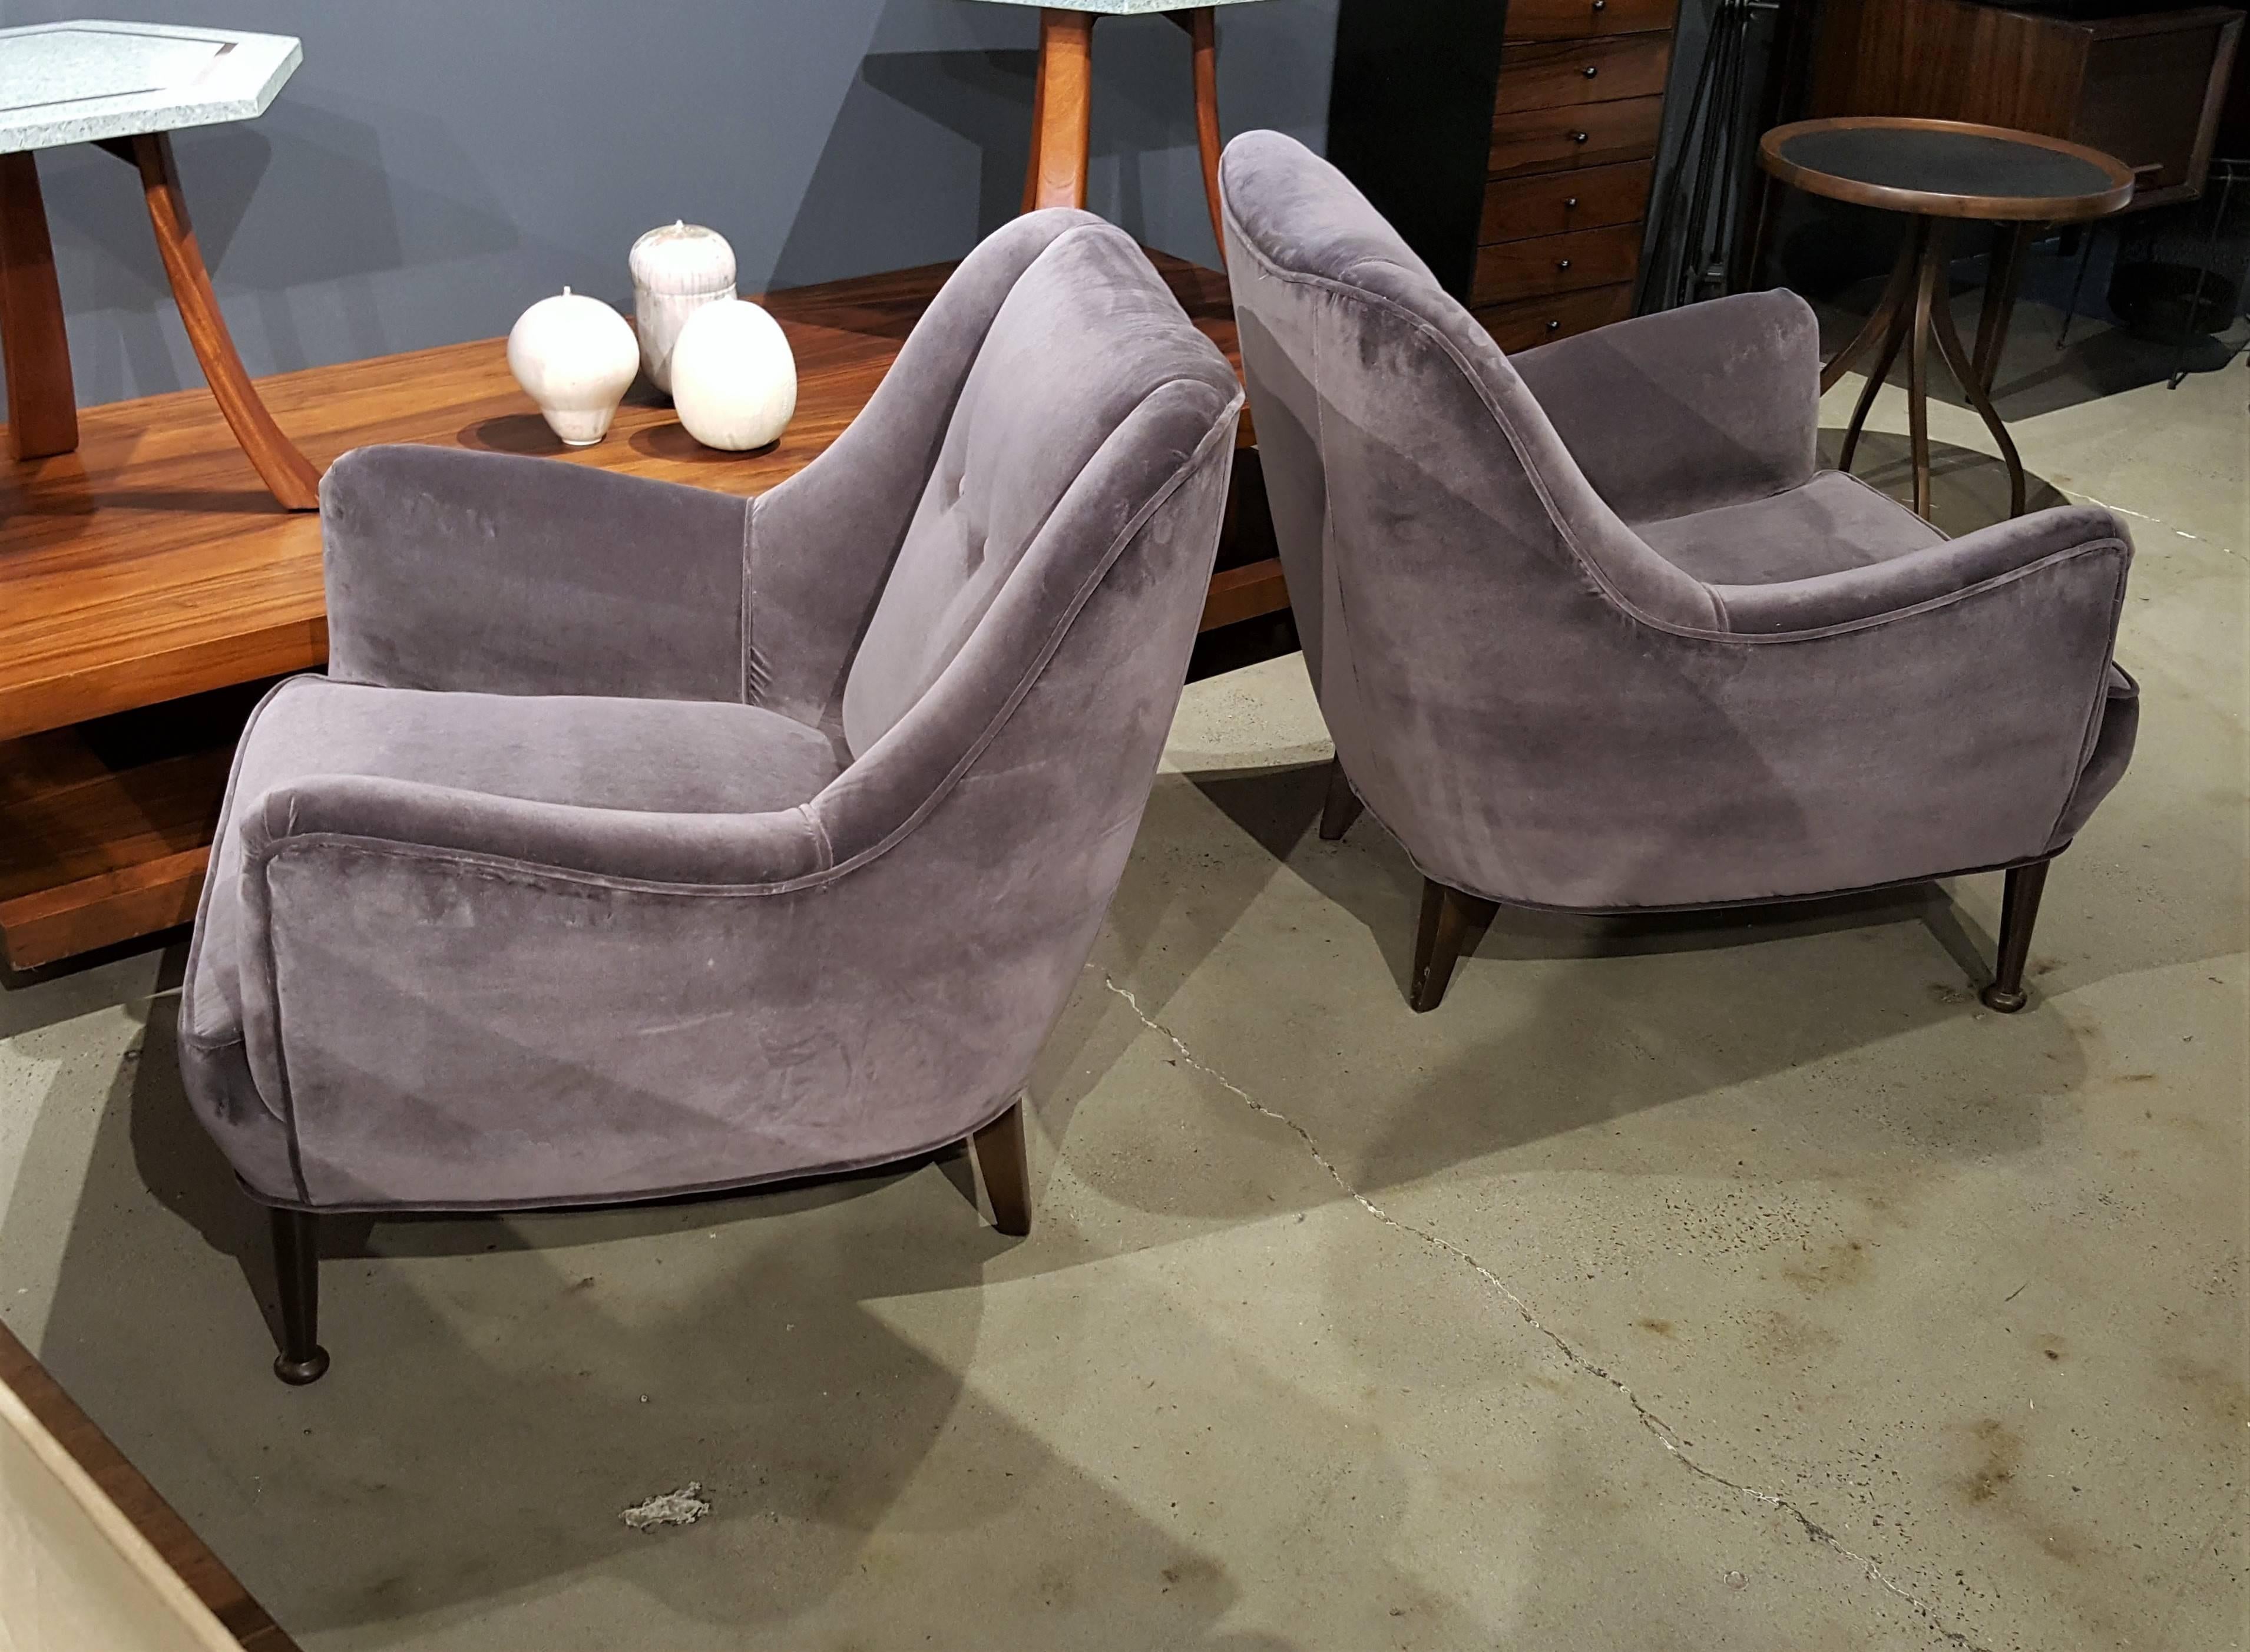 Pair of gorgeous Mid-Century Modern lounge chairs in deep gray lilac cotton velvet with sculptural walnut legs. Very comfortable and well made with Classic lines that work well in nearly any interior design scheme. The origin is unknown but they